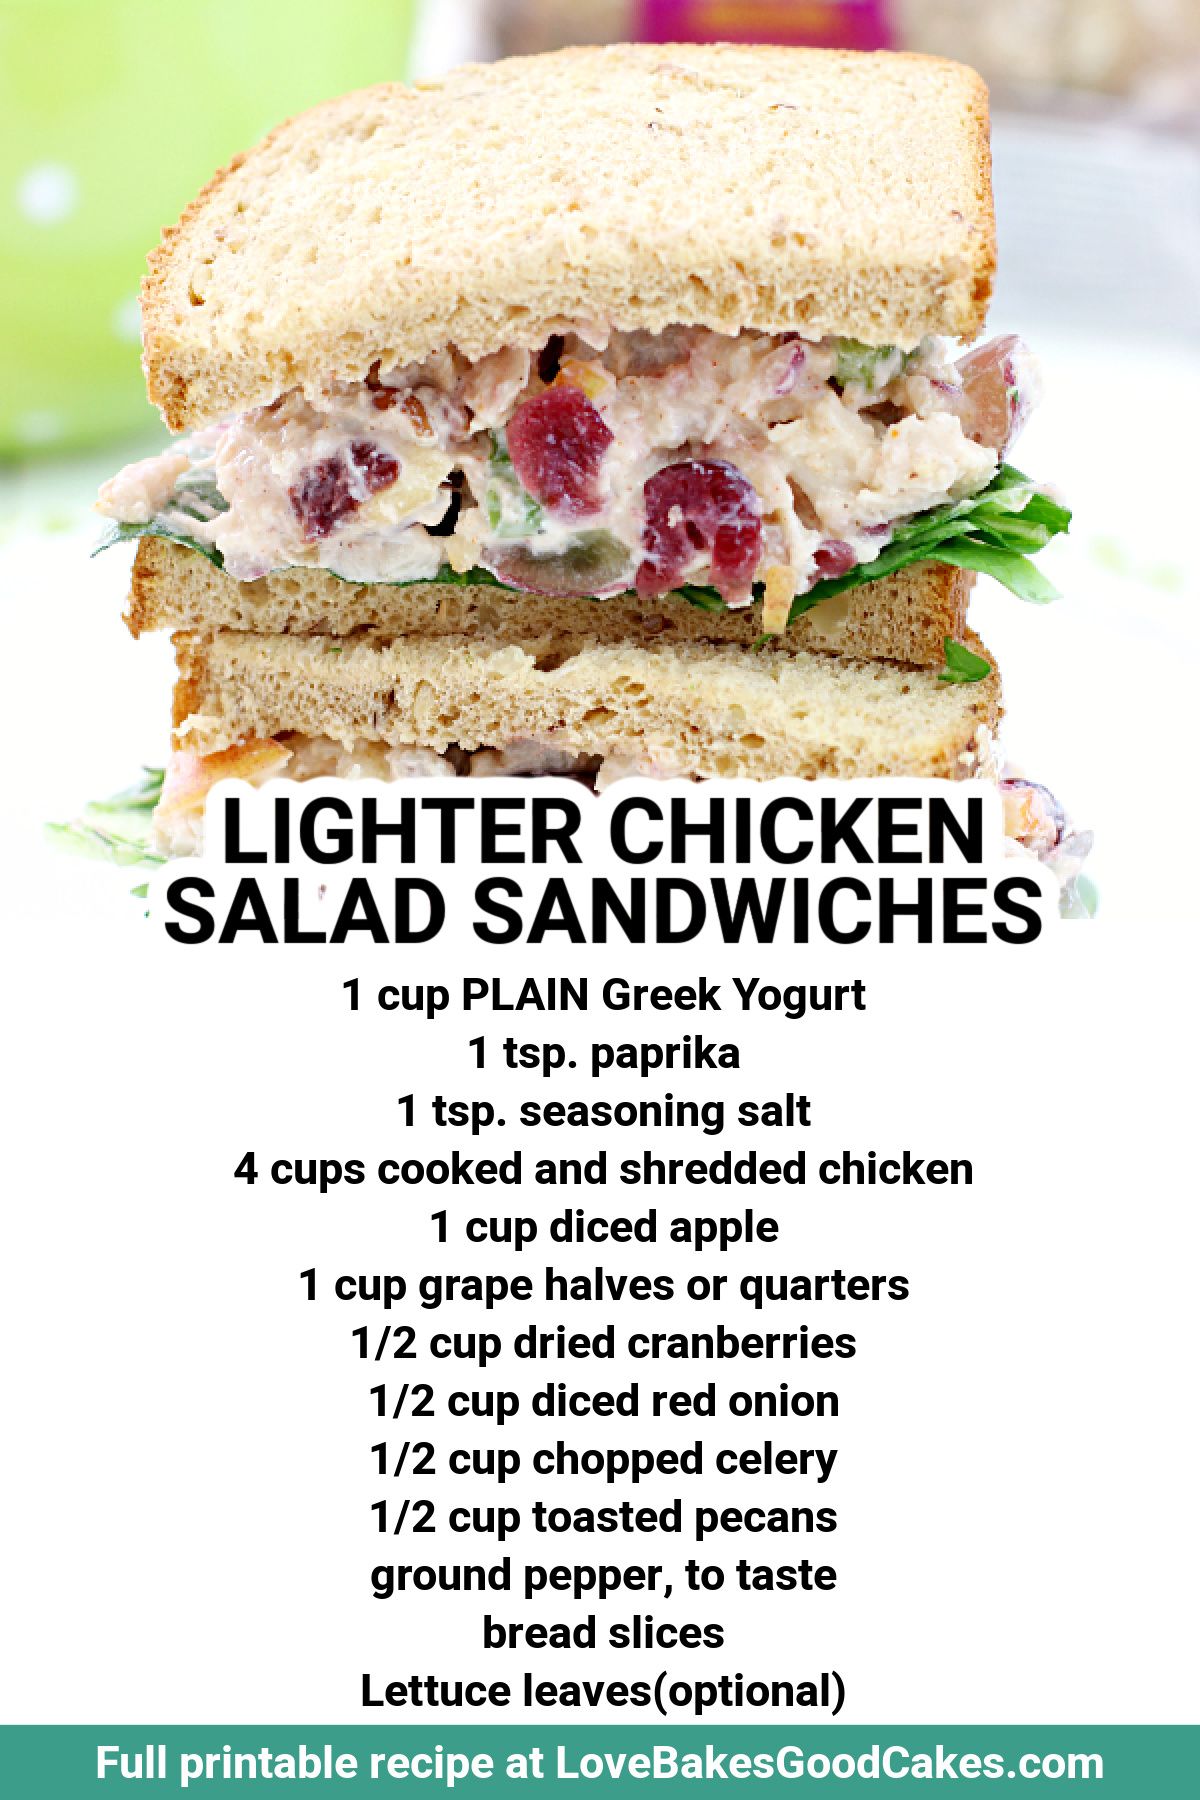 This Lighter Chicken Salad Sandwiches recipe makes a great lunch or dinner idea!